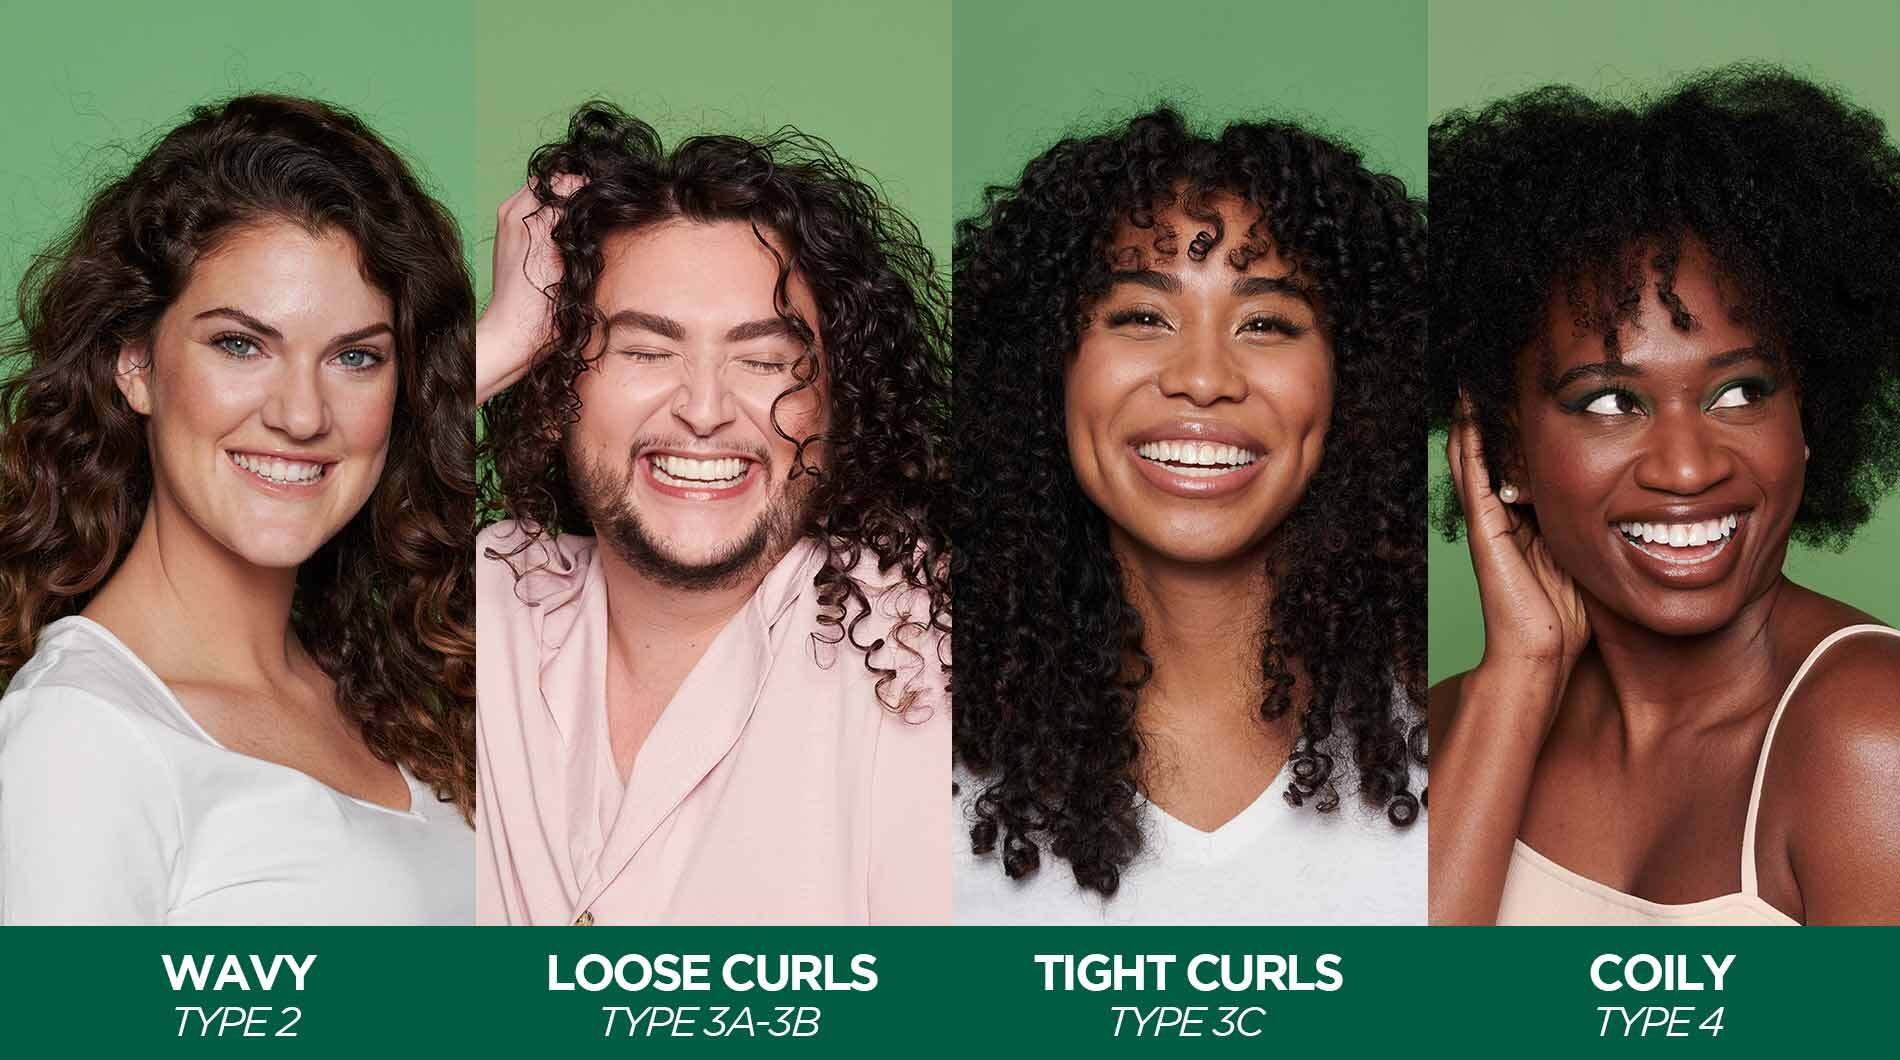 The best curly hair routines and styling products - Garnier